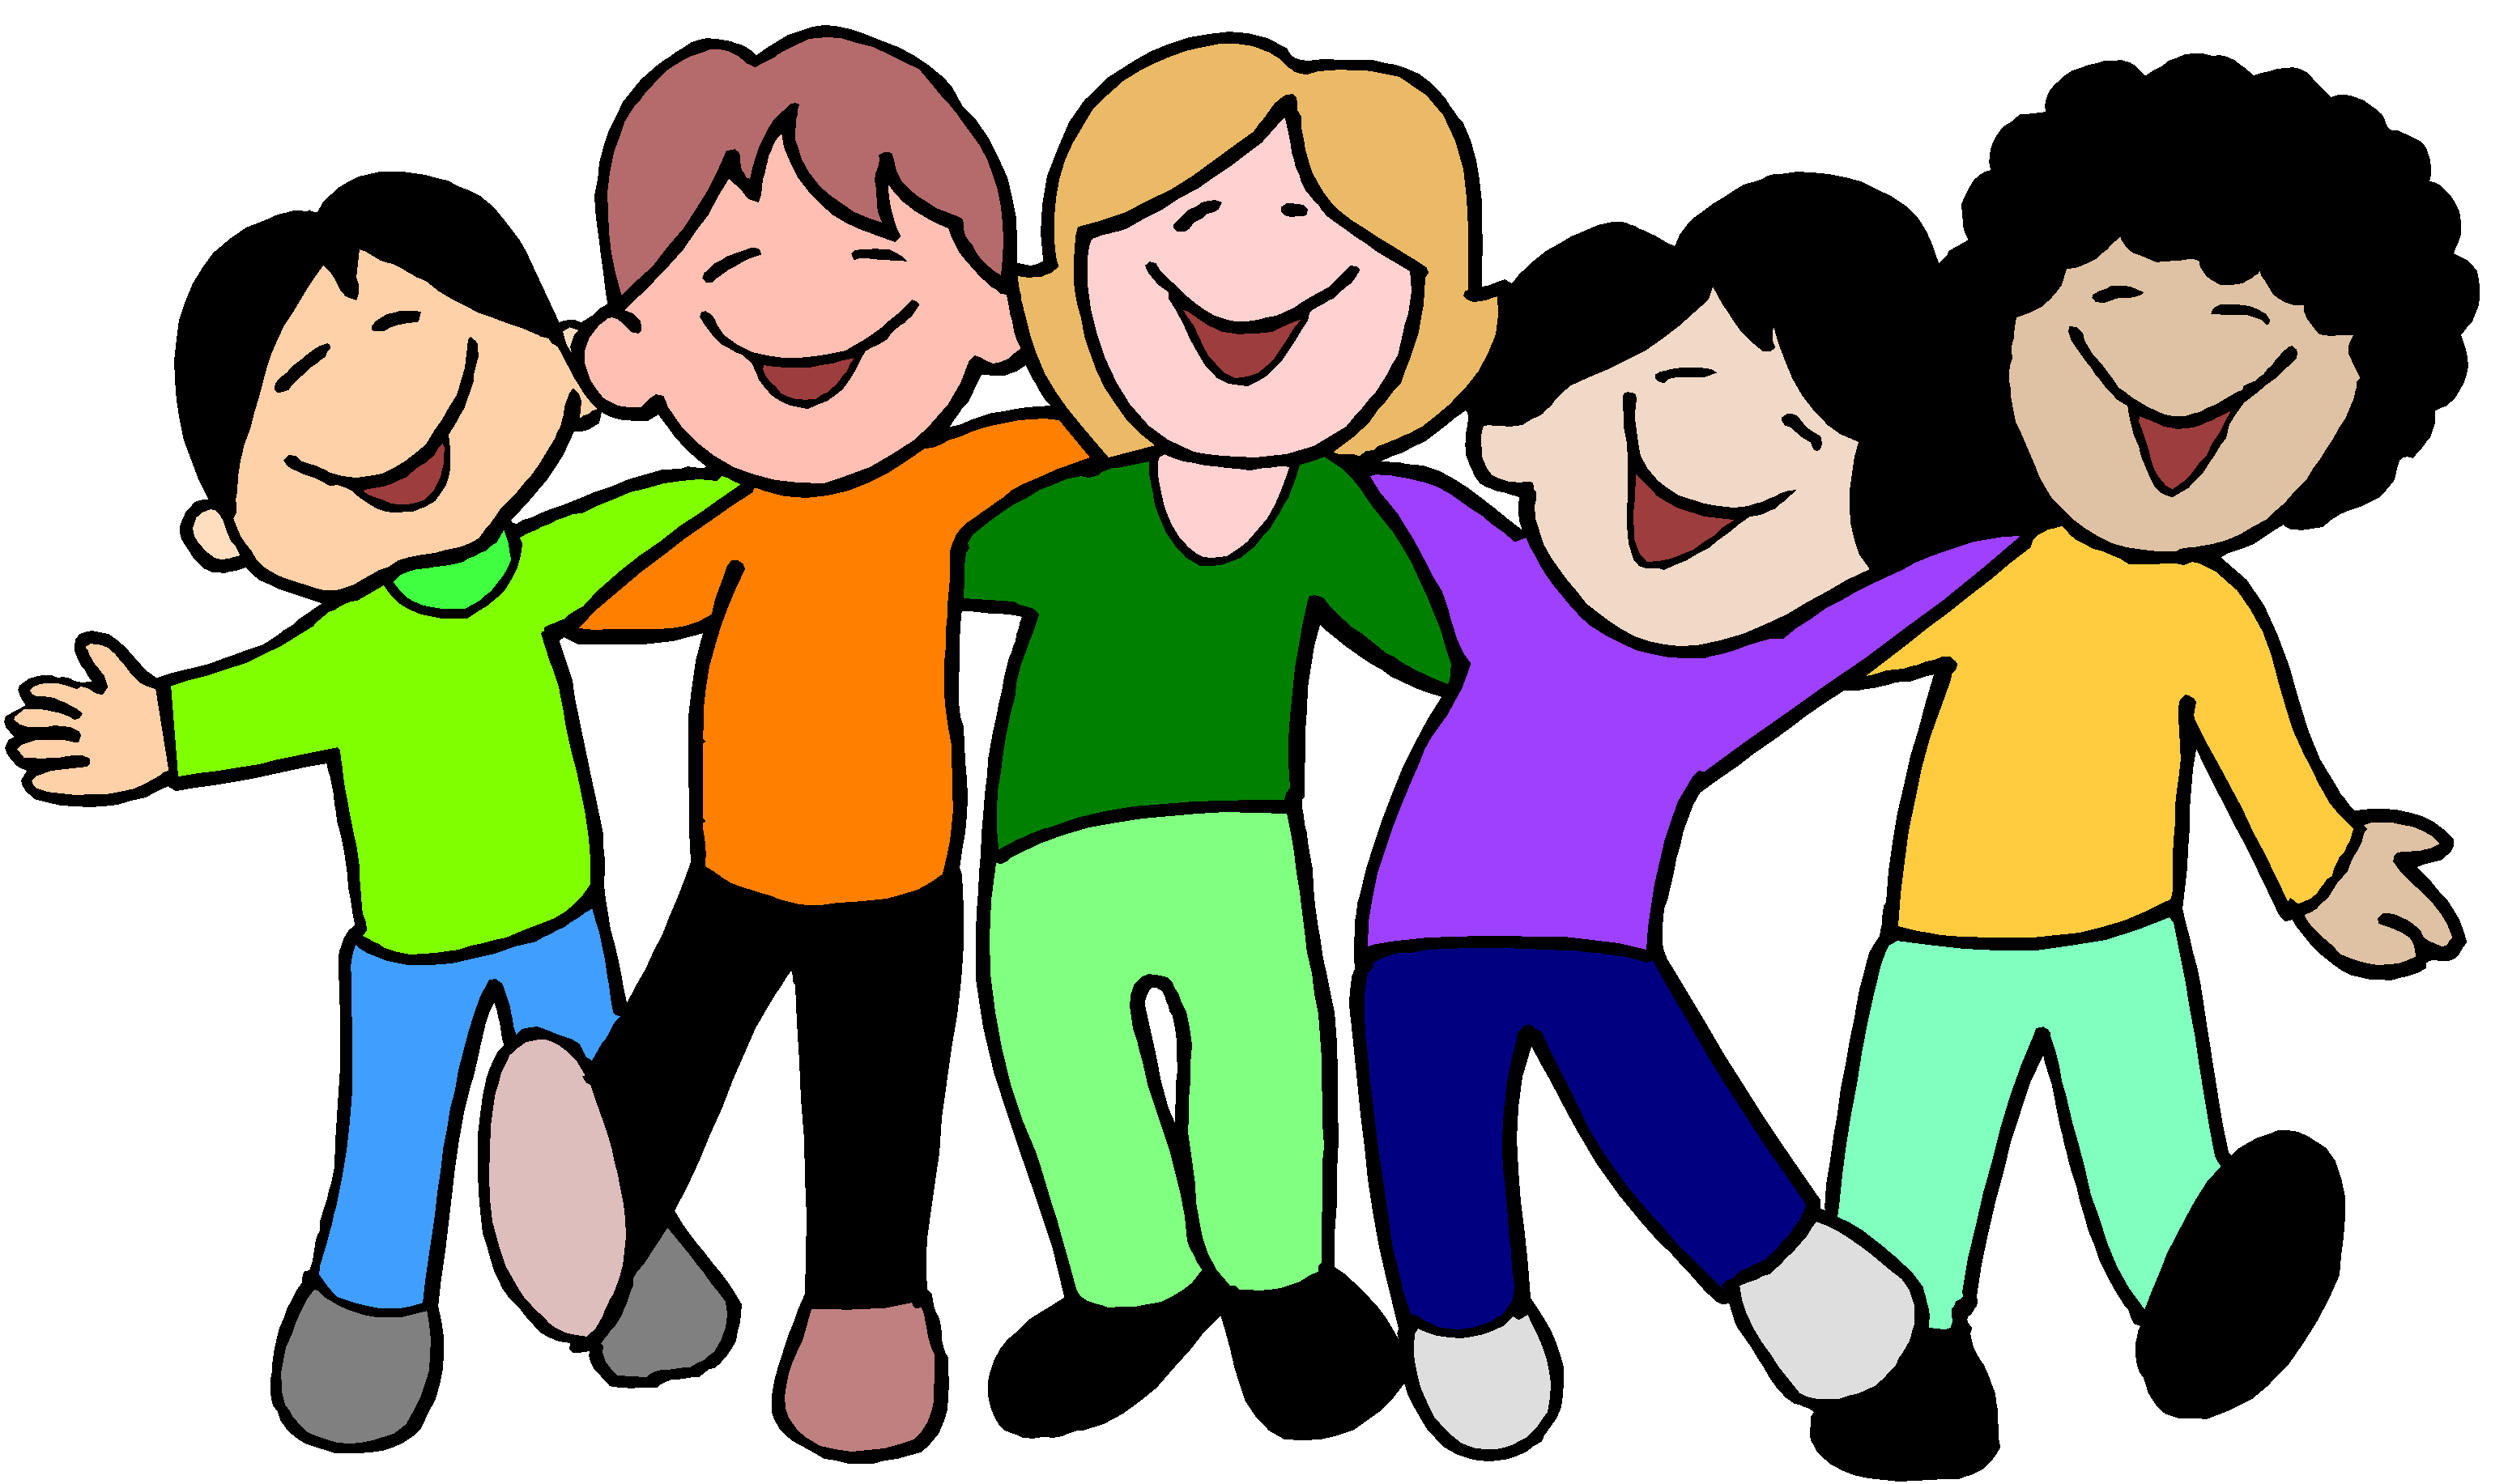 Top kids clip art photo and c